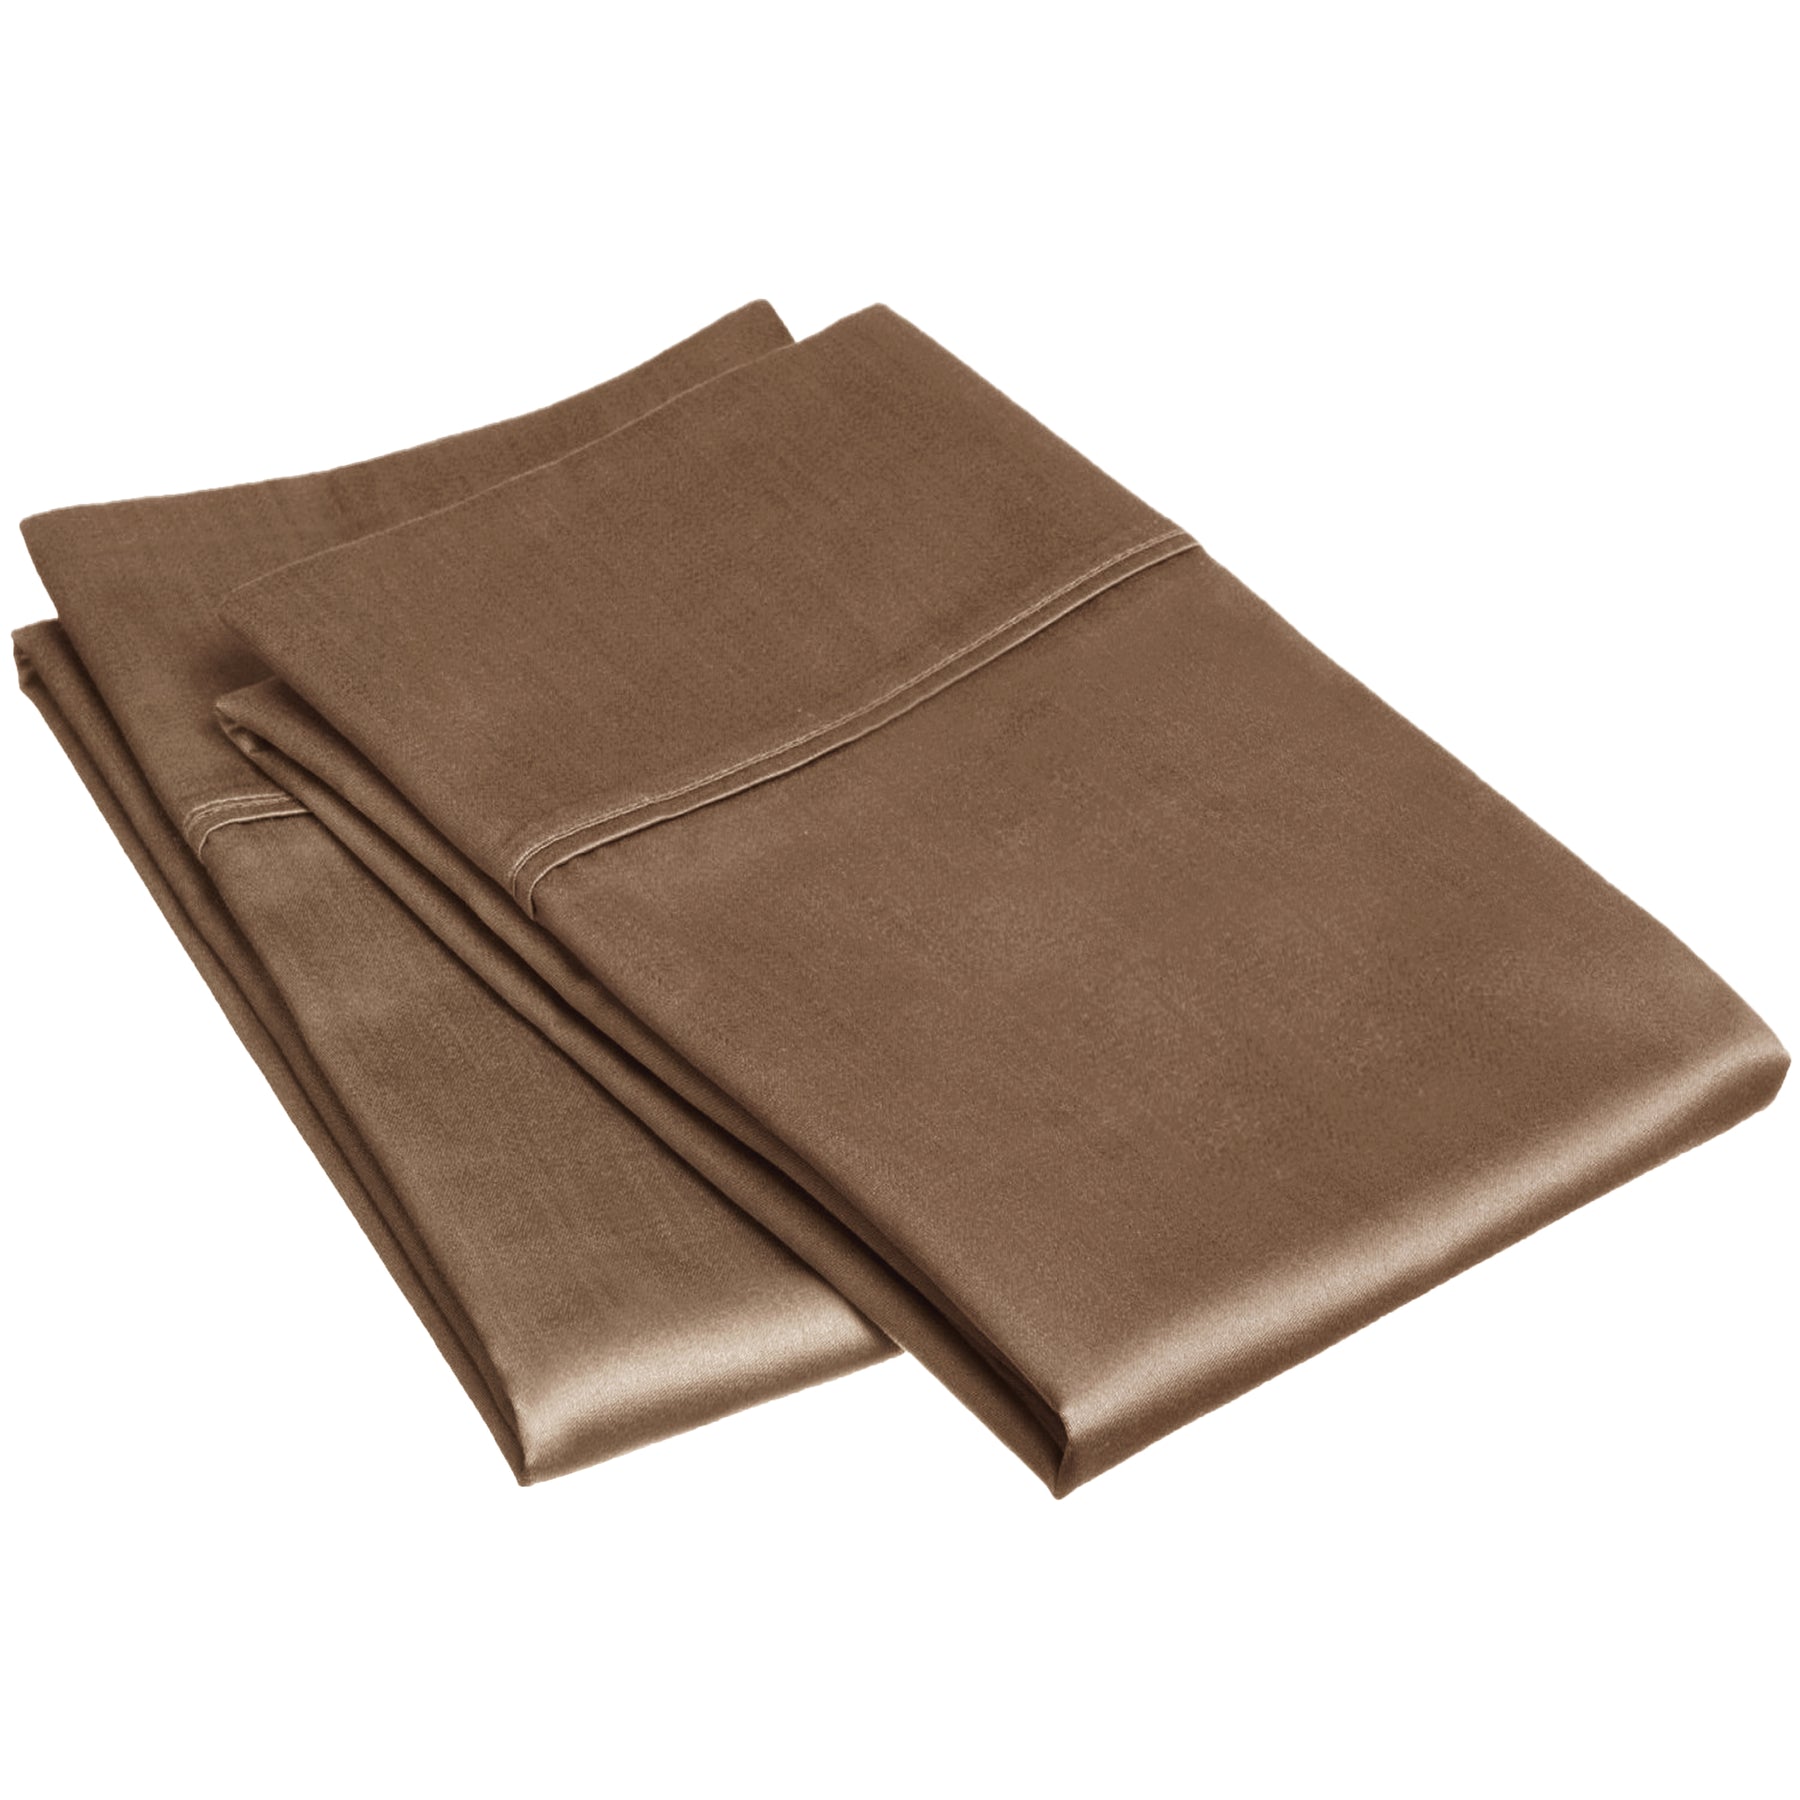 Superior Egyptian Cotton 300 Thread Count Solid Pillowcase Set - Taupe